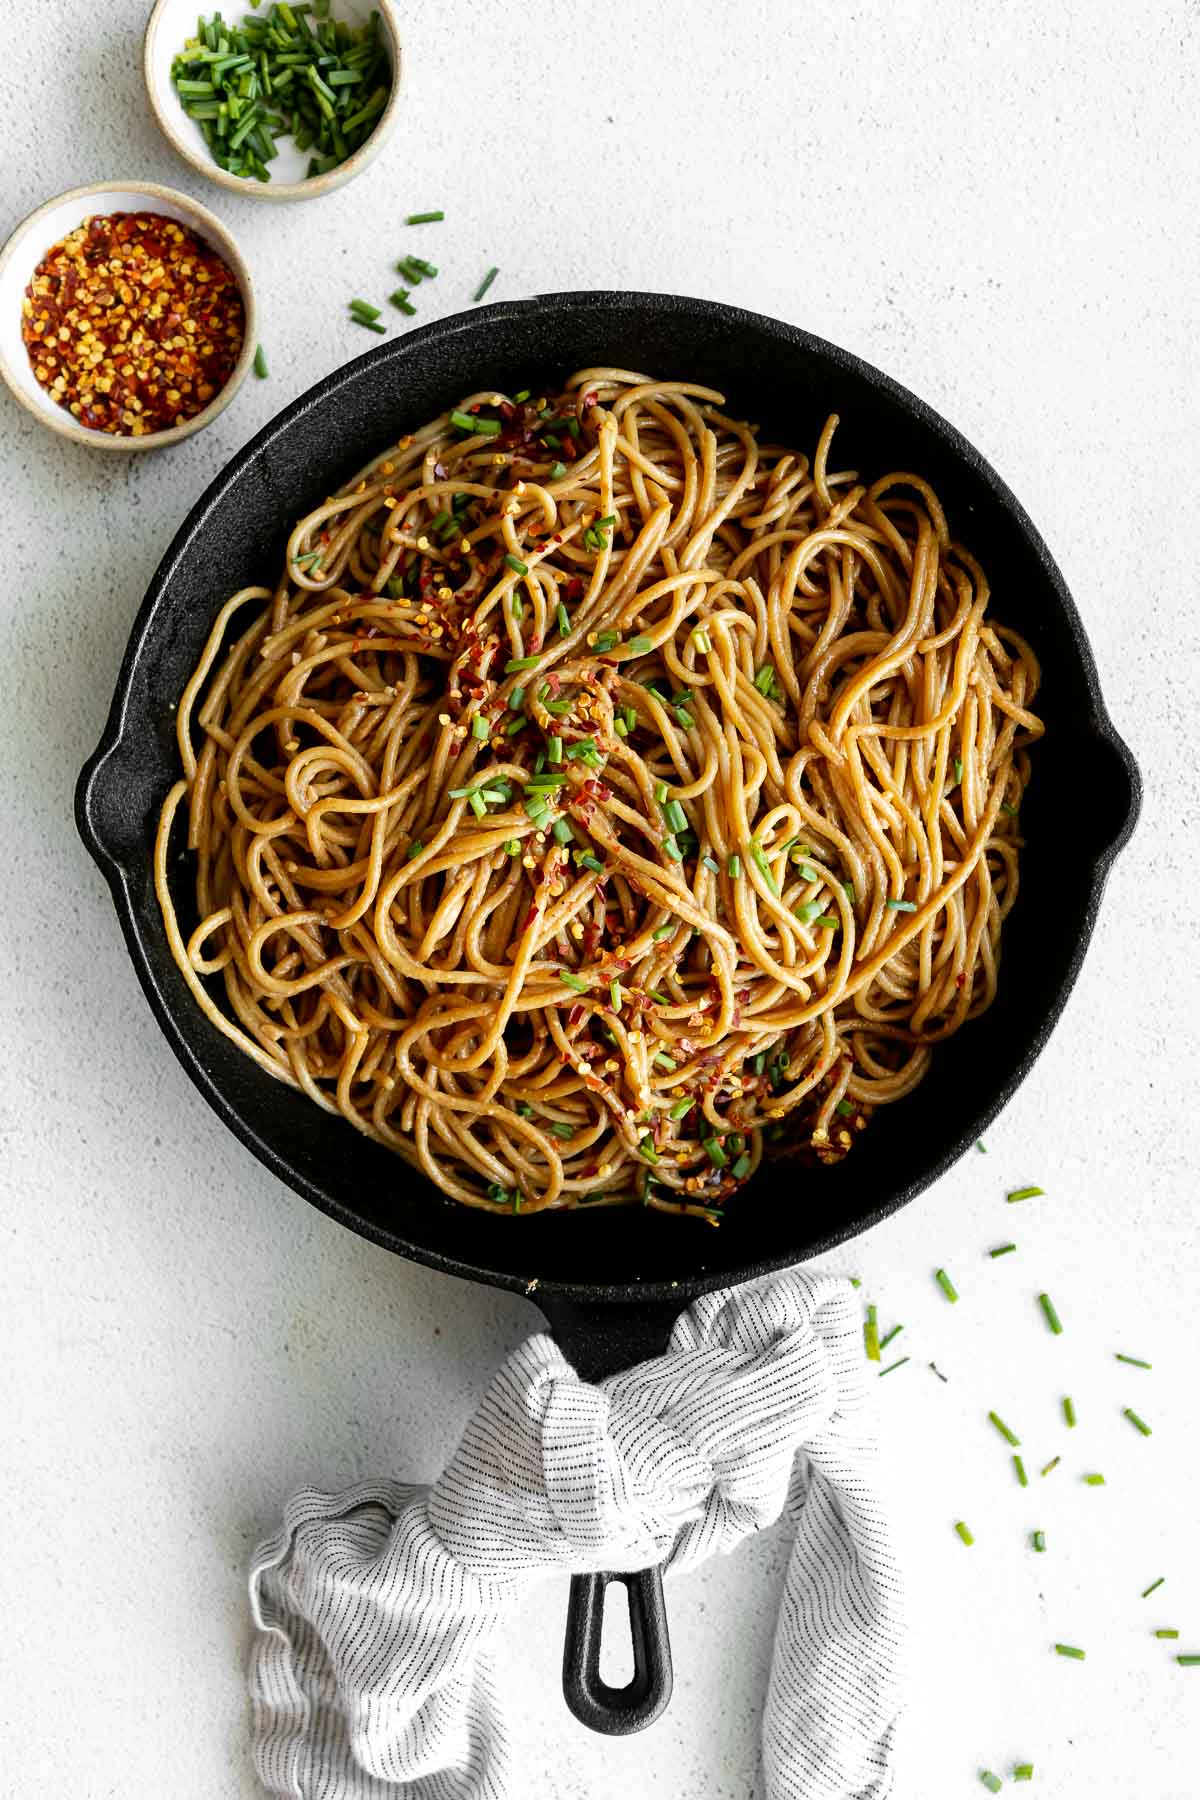 Skillet with the noodles and a large spoon on the side.